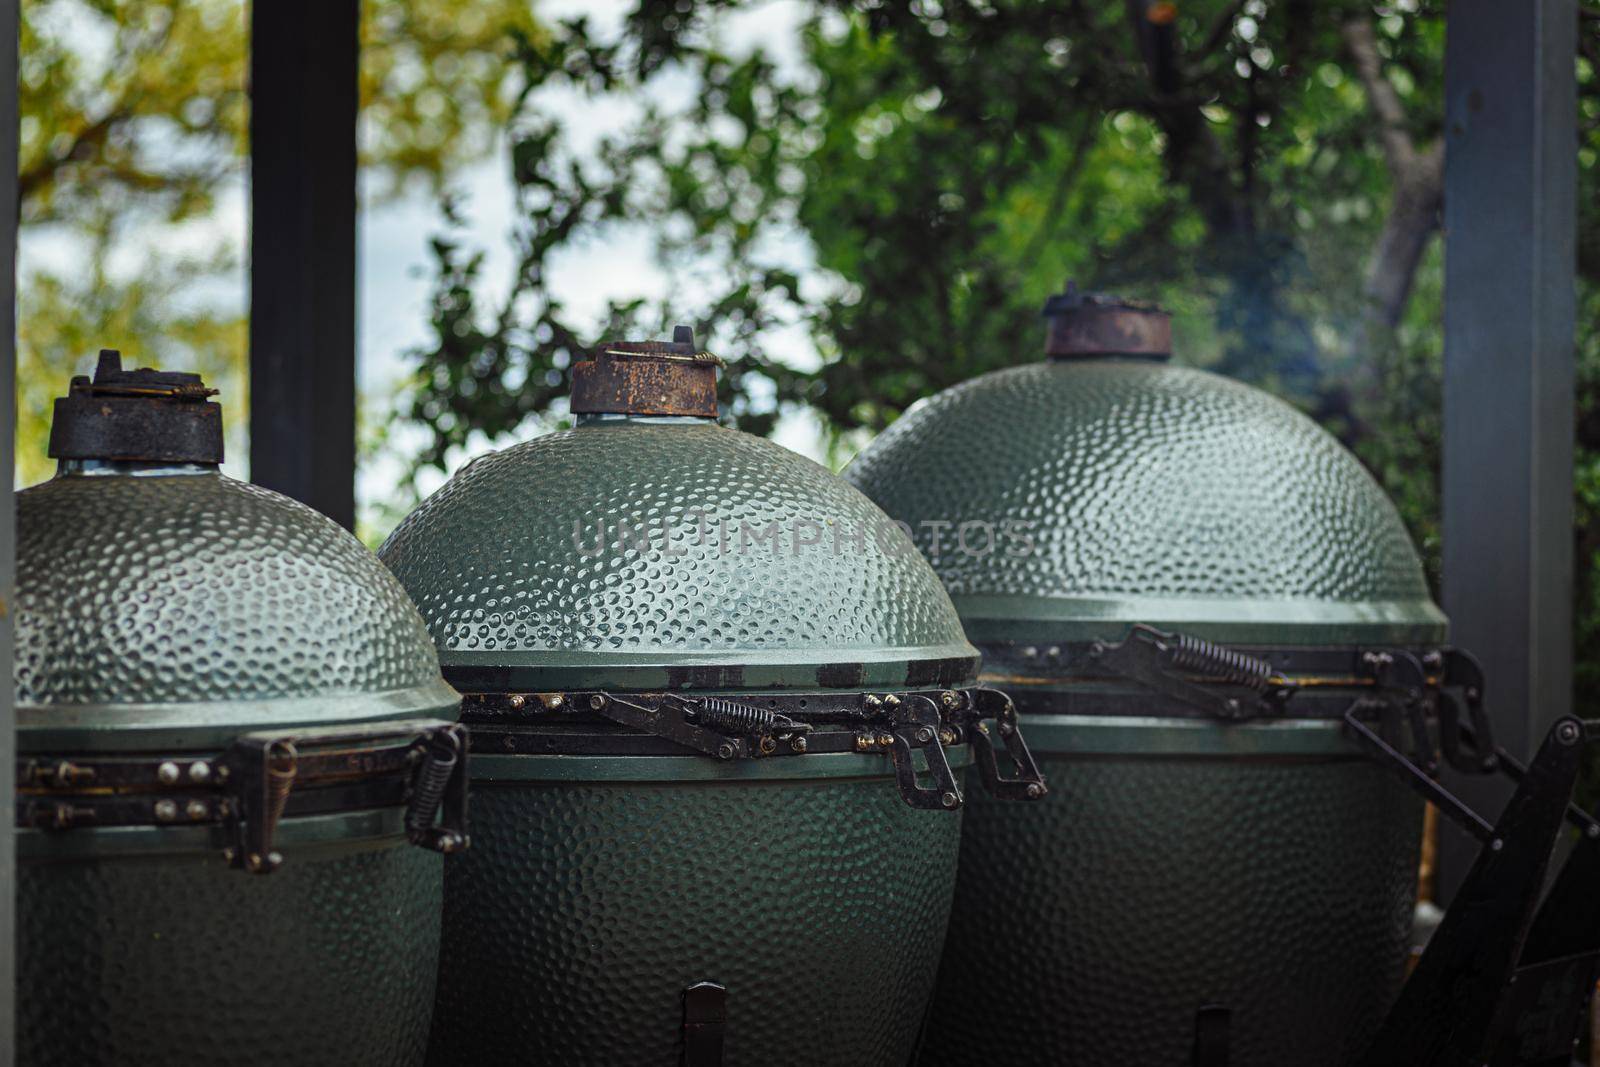 Close up image of The Green Egg outdoor barbecue. Very popular ceramic bbq.